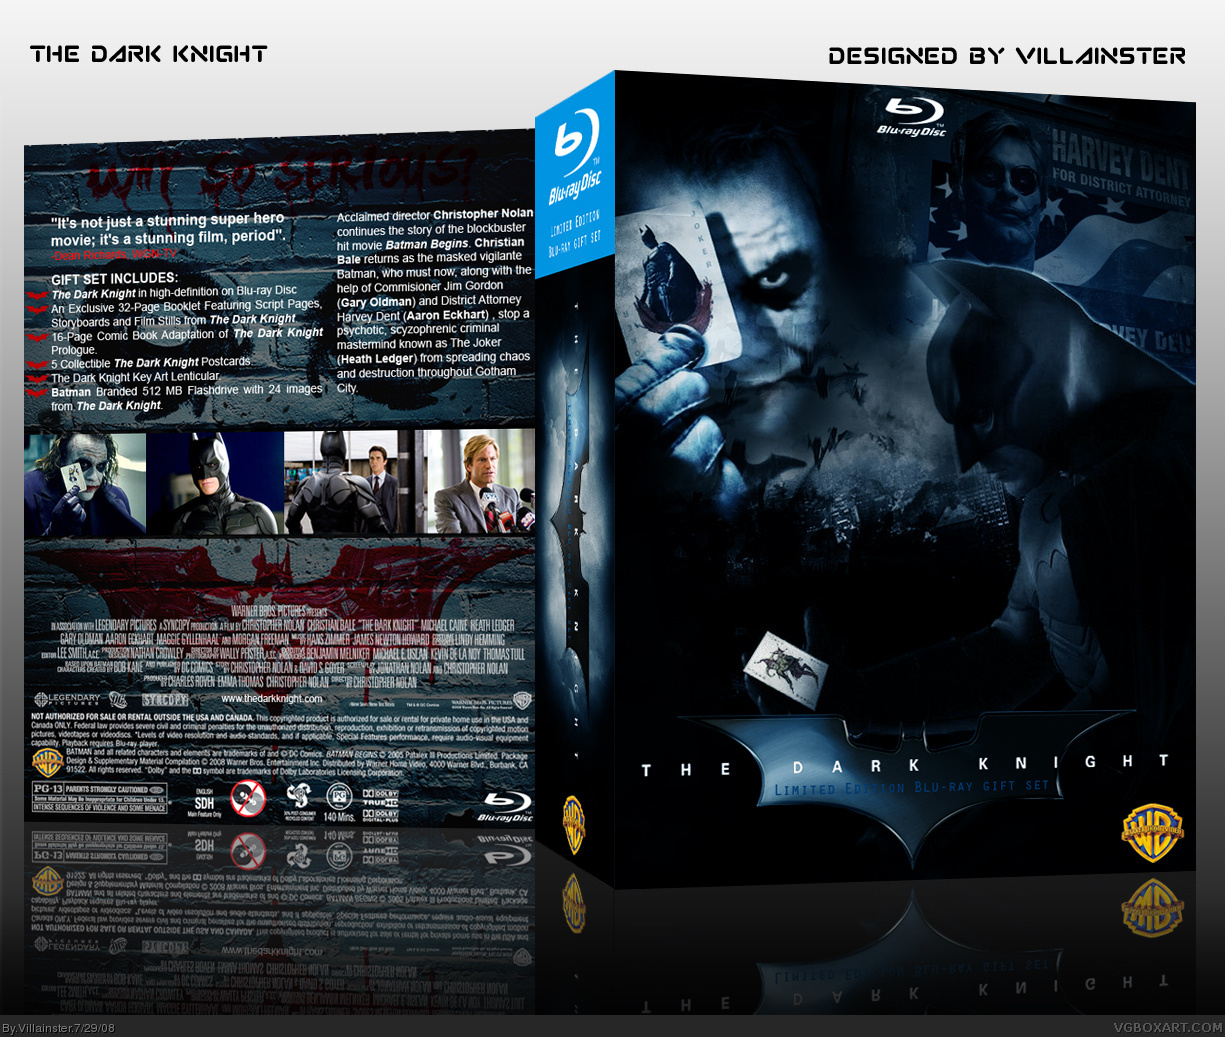 The Dark Knight Limited Edition Blu-ray Gift Set box cover